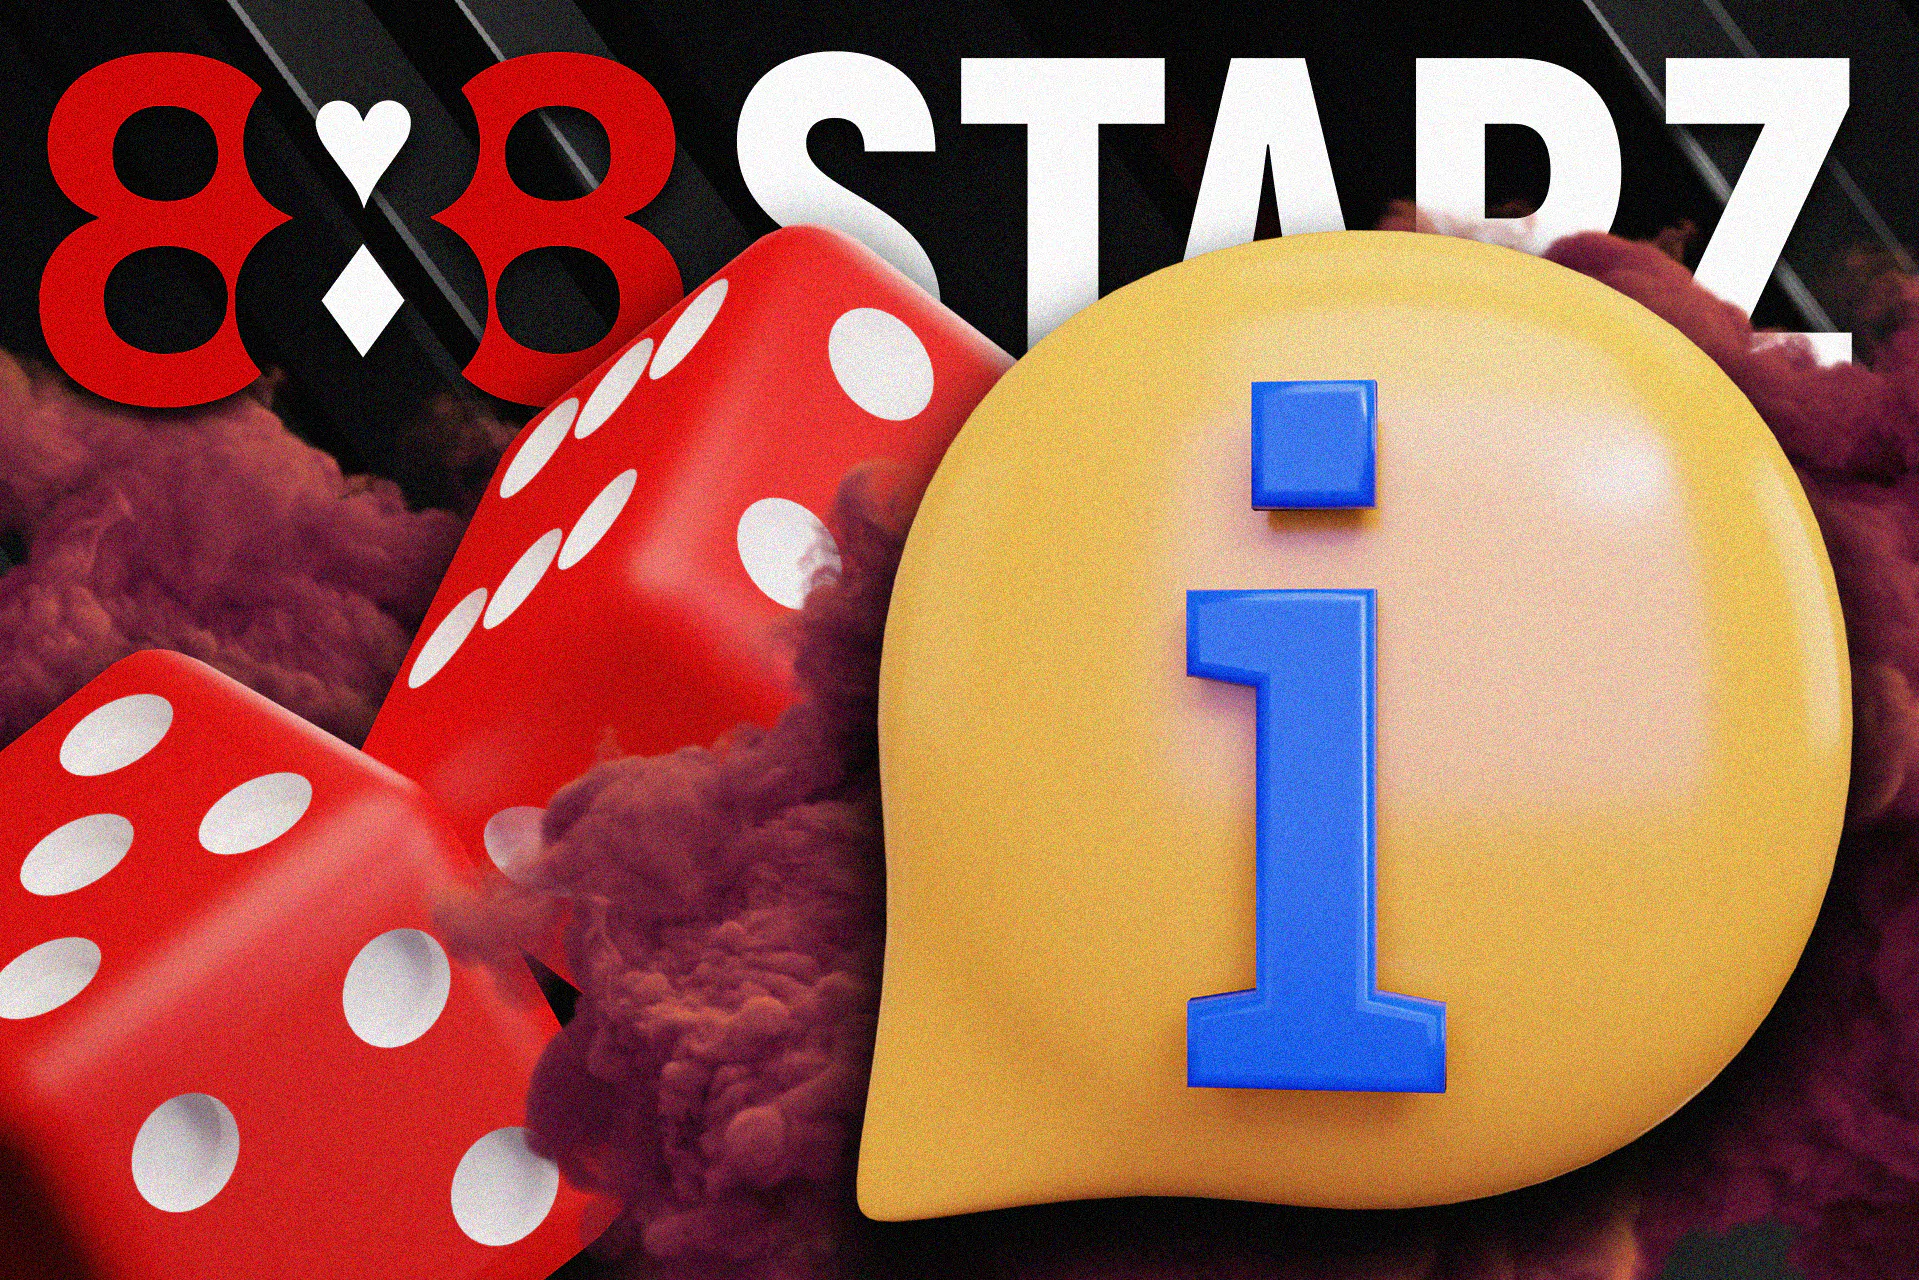 888starz helps to avoid the gambling addiction.